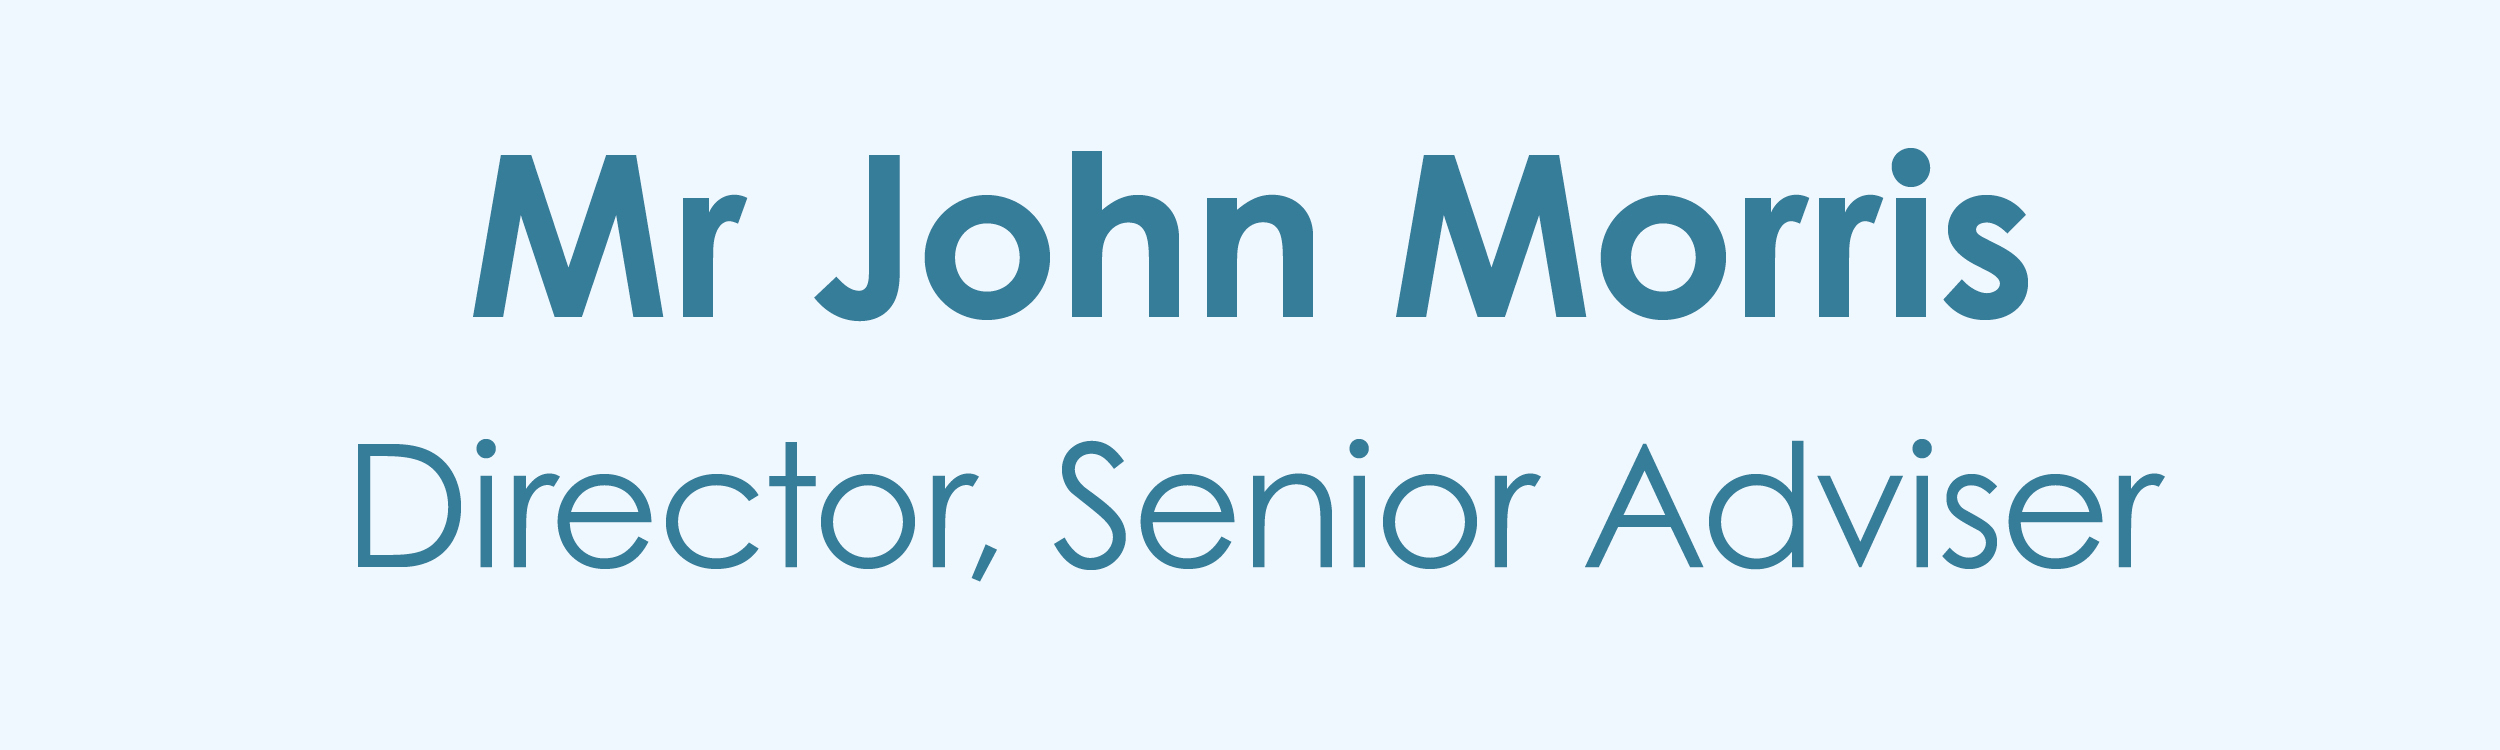 A title plaque for the picture of Mr John Morris, Director and Financial Adviser.